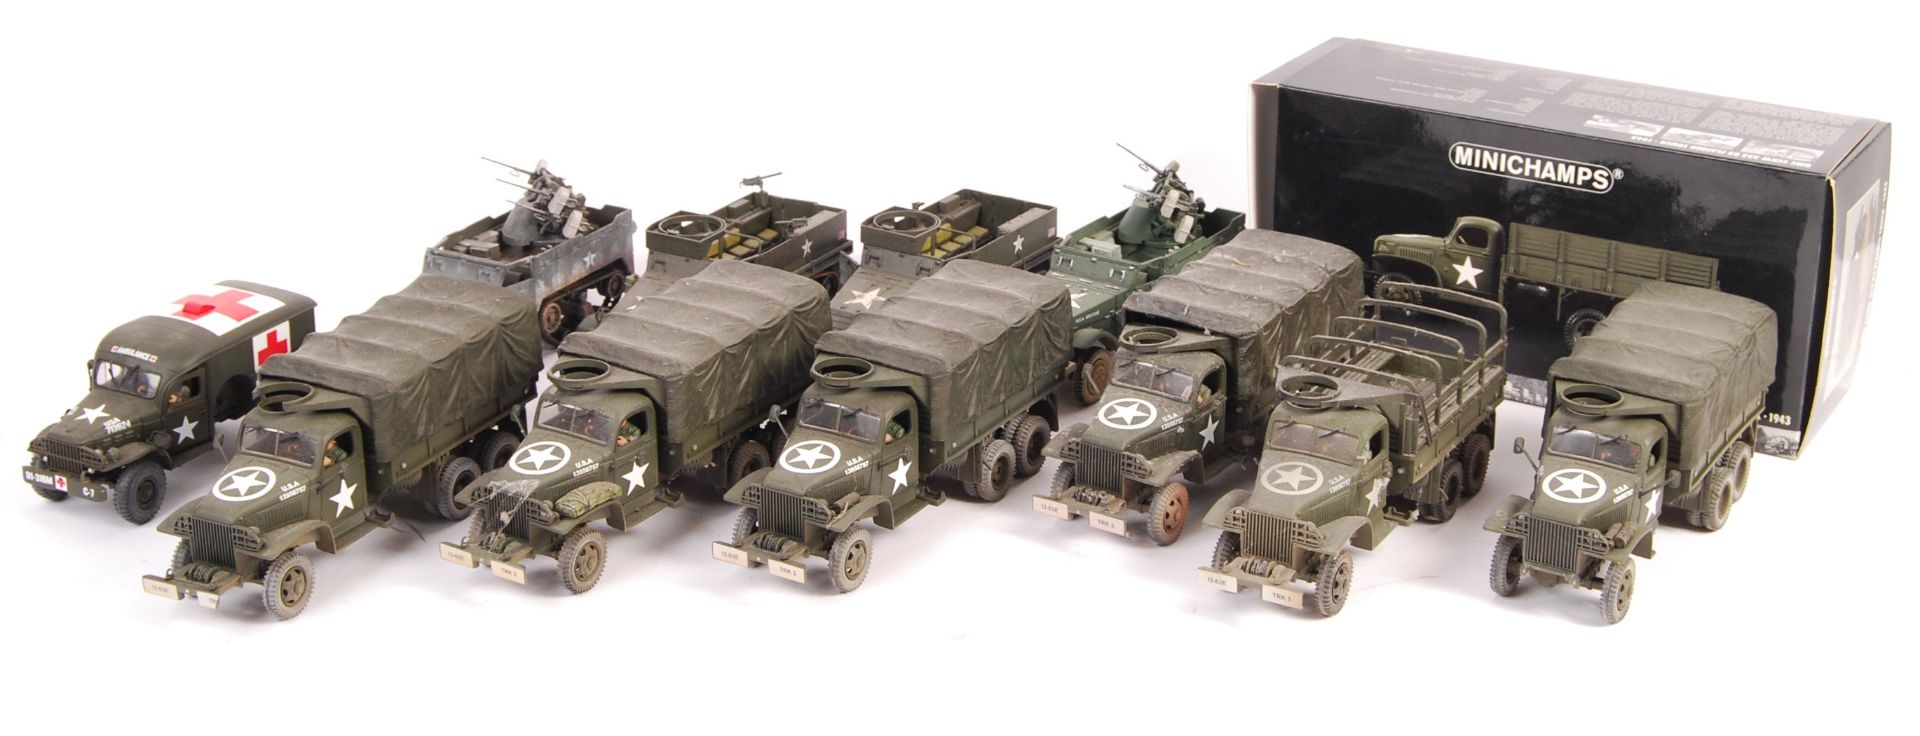 ASSORTED UNIMAX MADE FORCES OF VALOUR 1:32 SCALE MILITARY VEHICLES